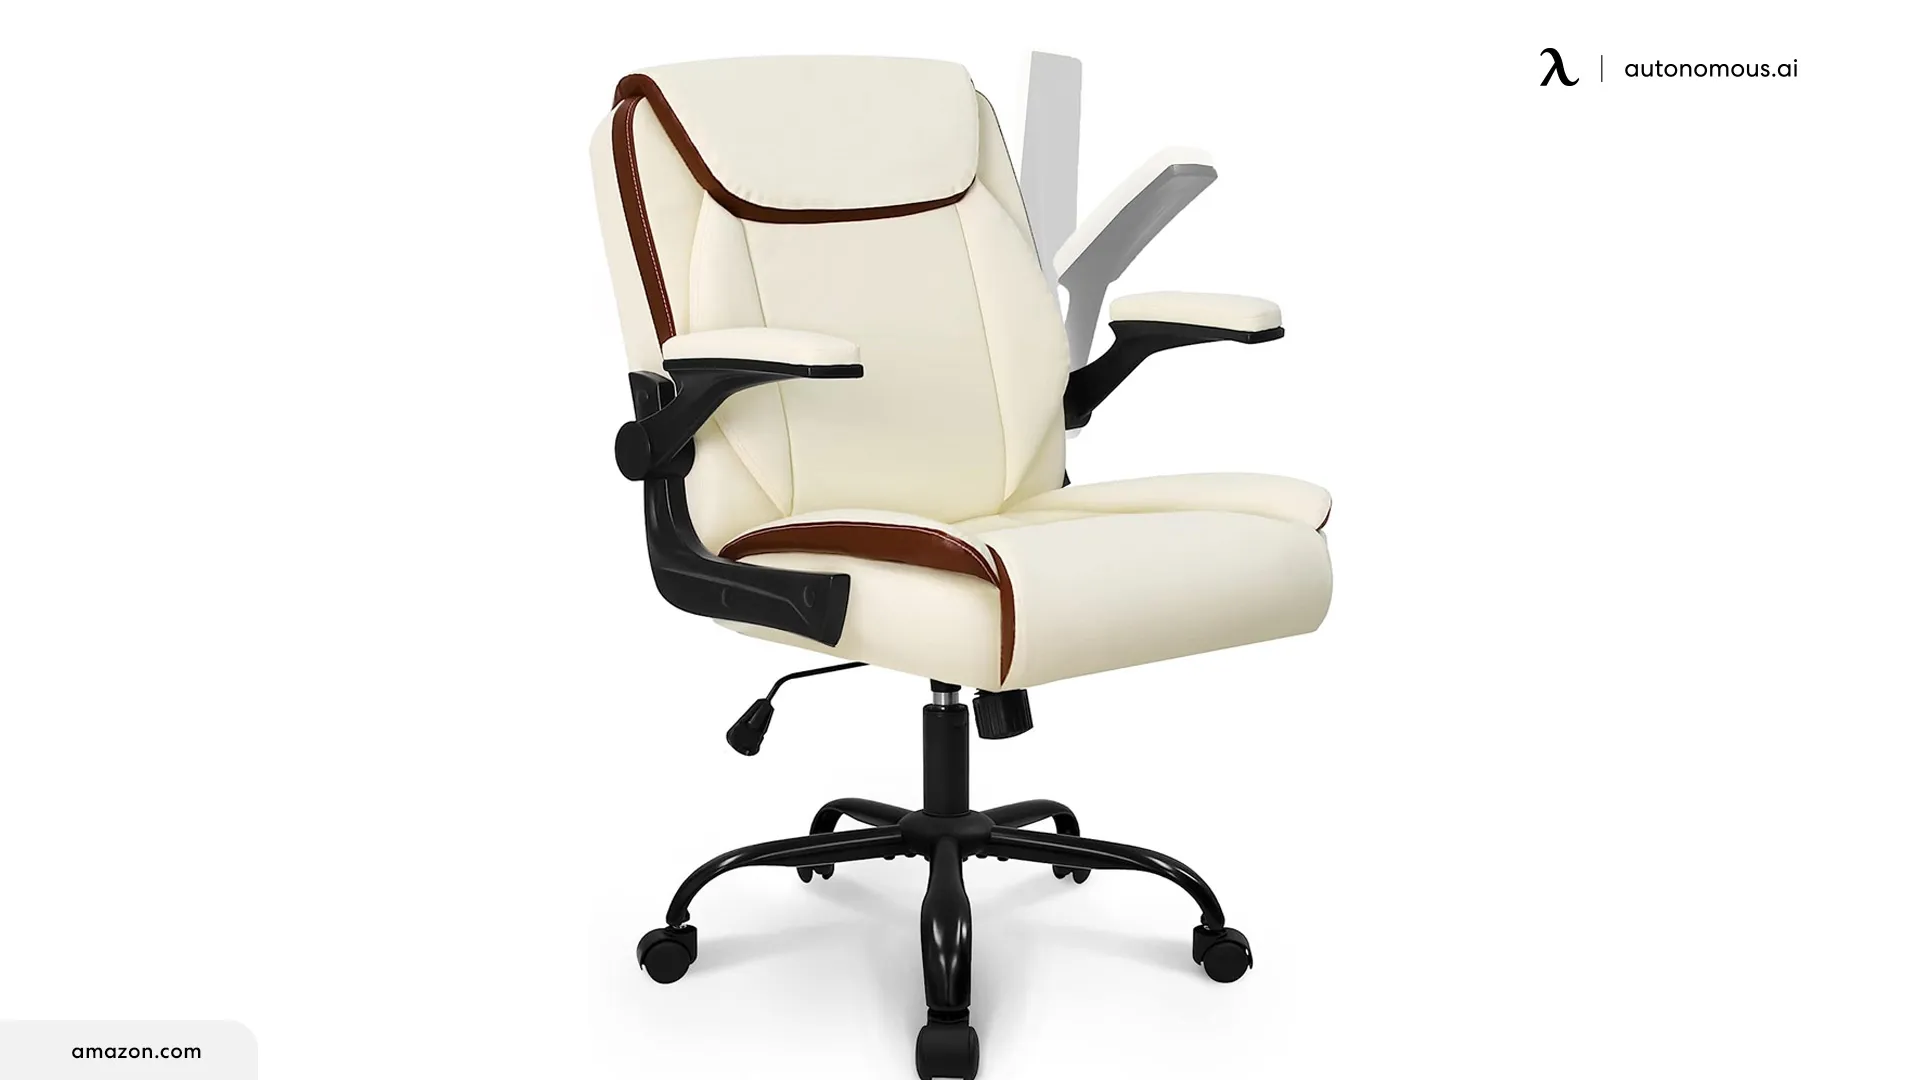 NEO CHAIR Office Chair